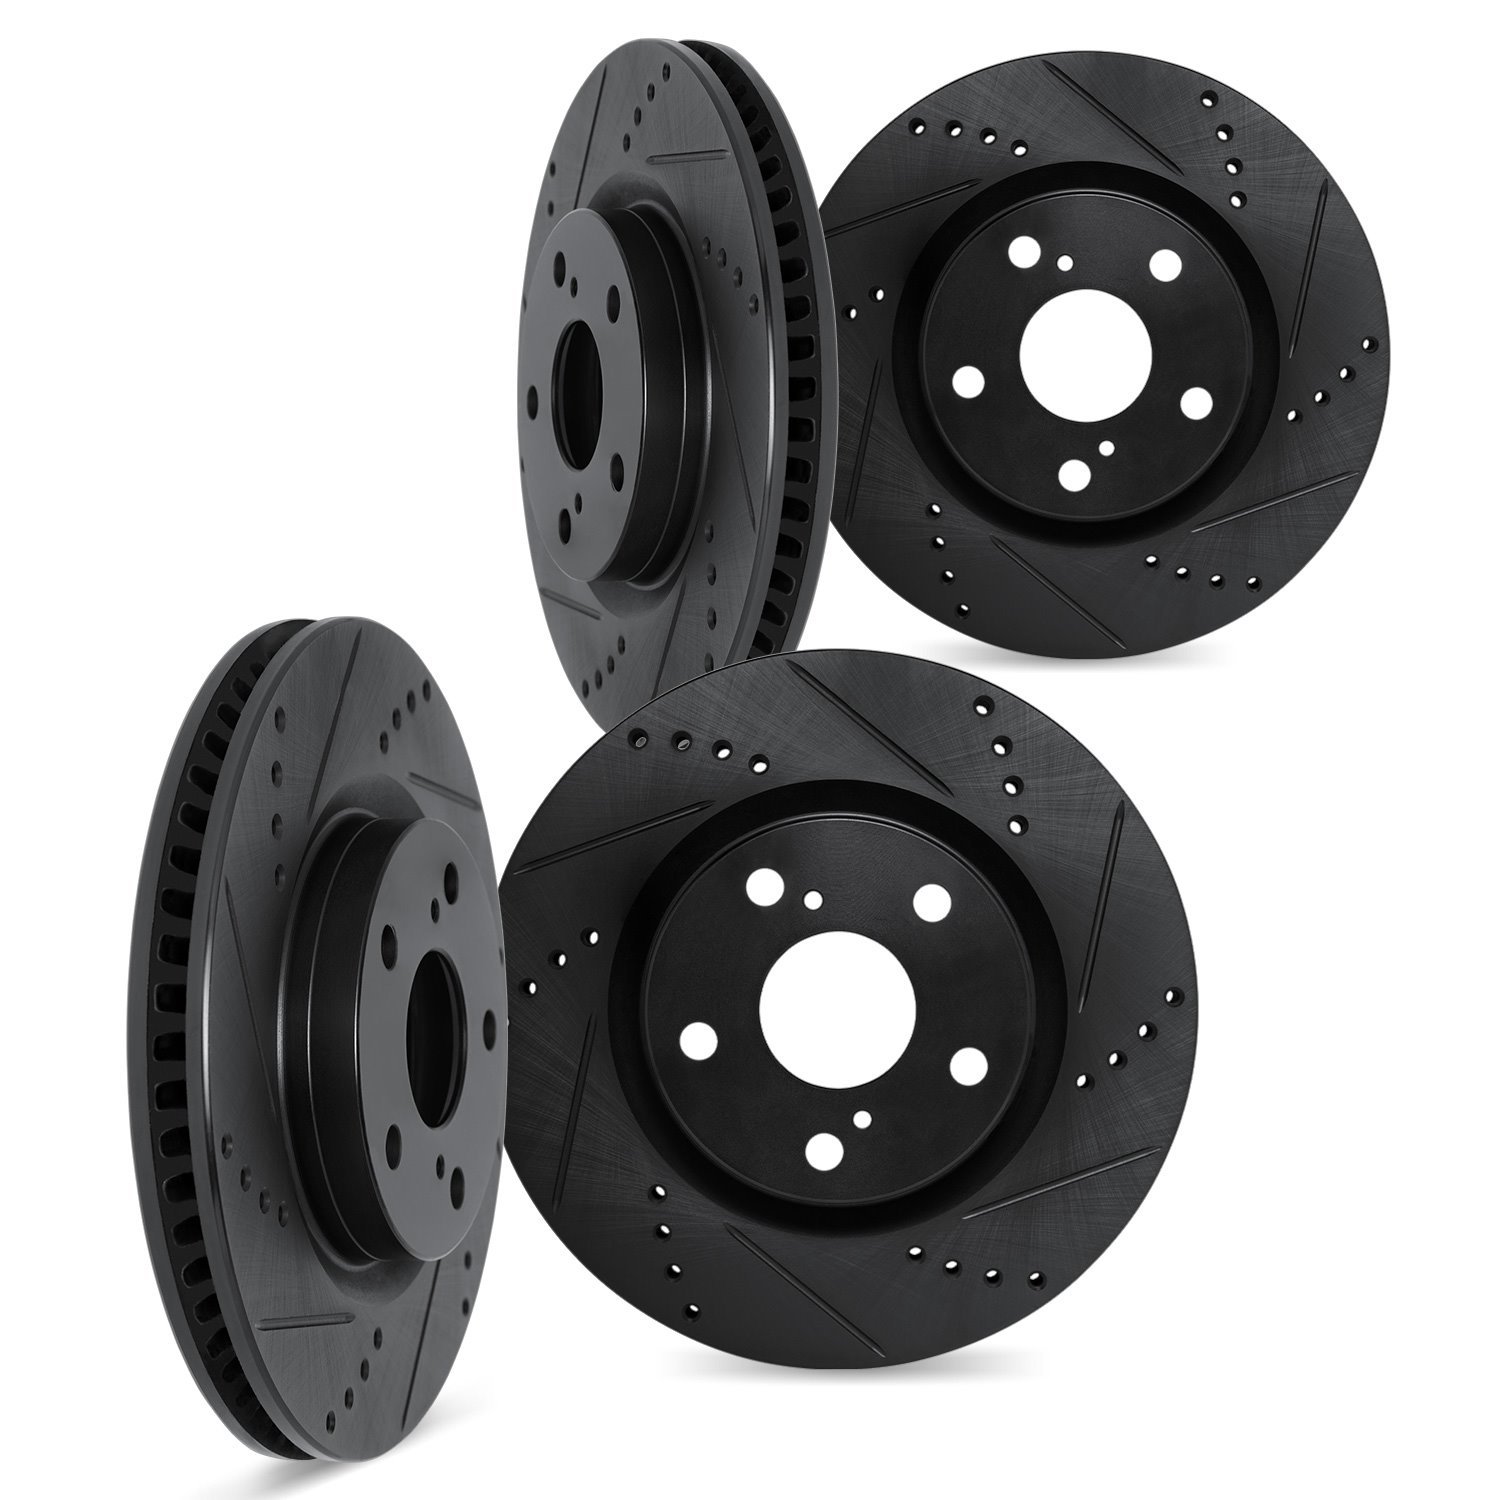 8004-68007 Drilled/Slotted Brake Rotors [Black], 1997-2001 Infiniti/Nissan, Position: Front and Rear